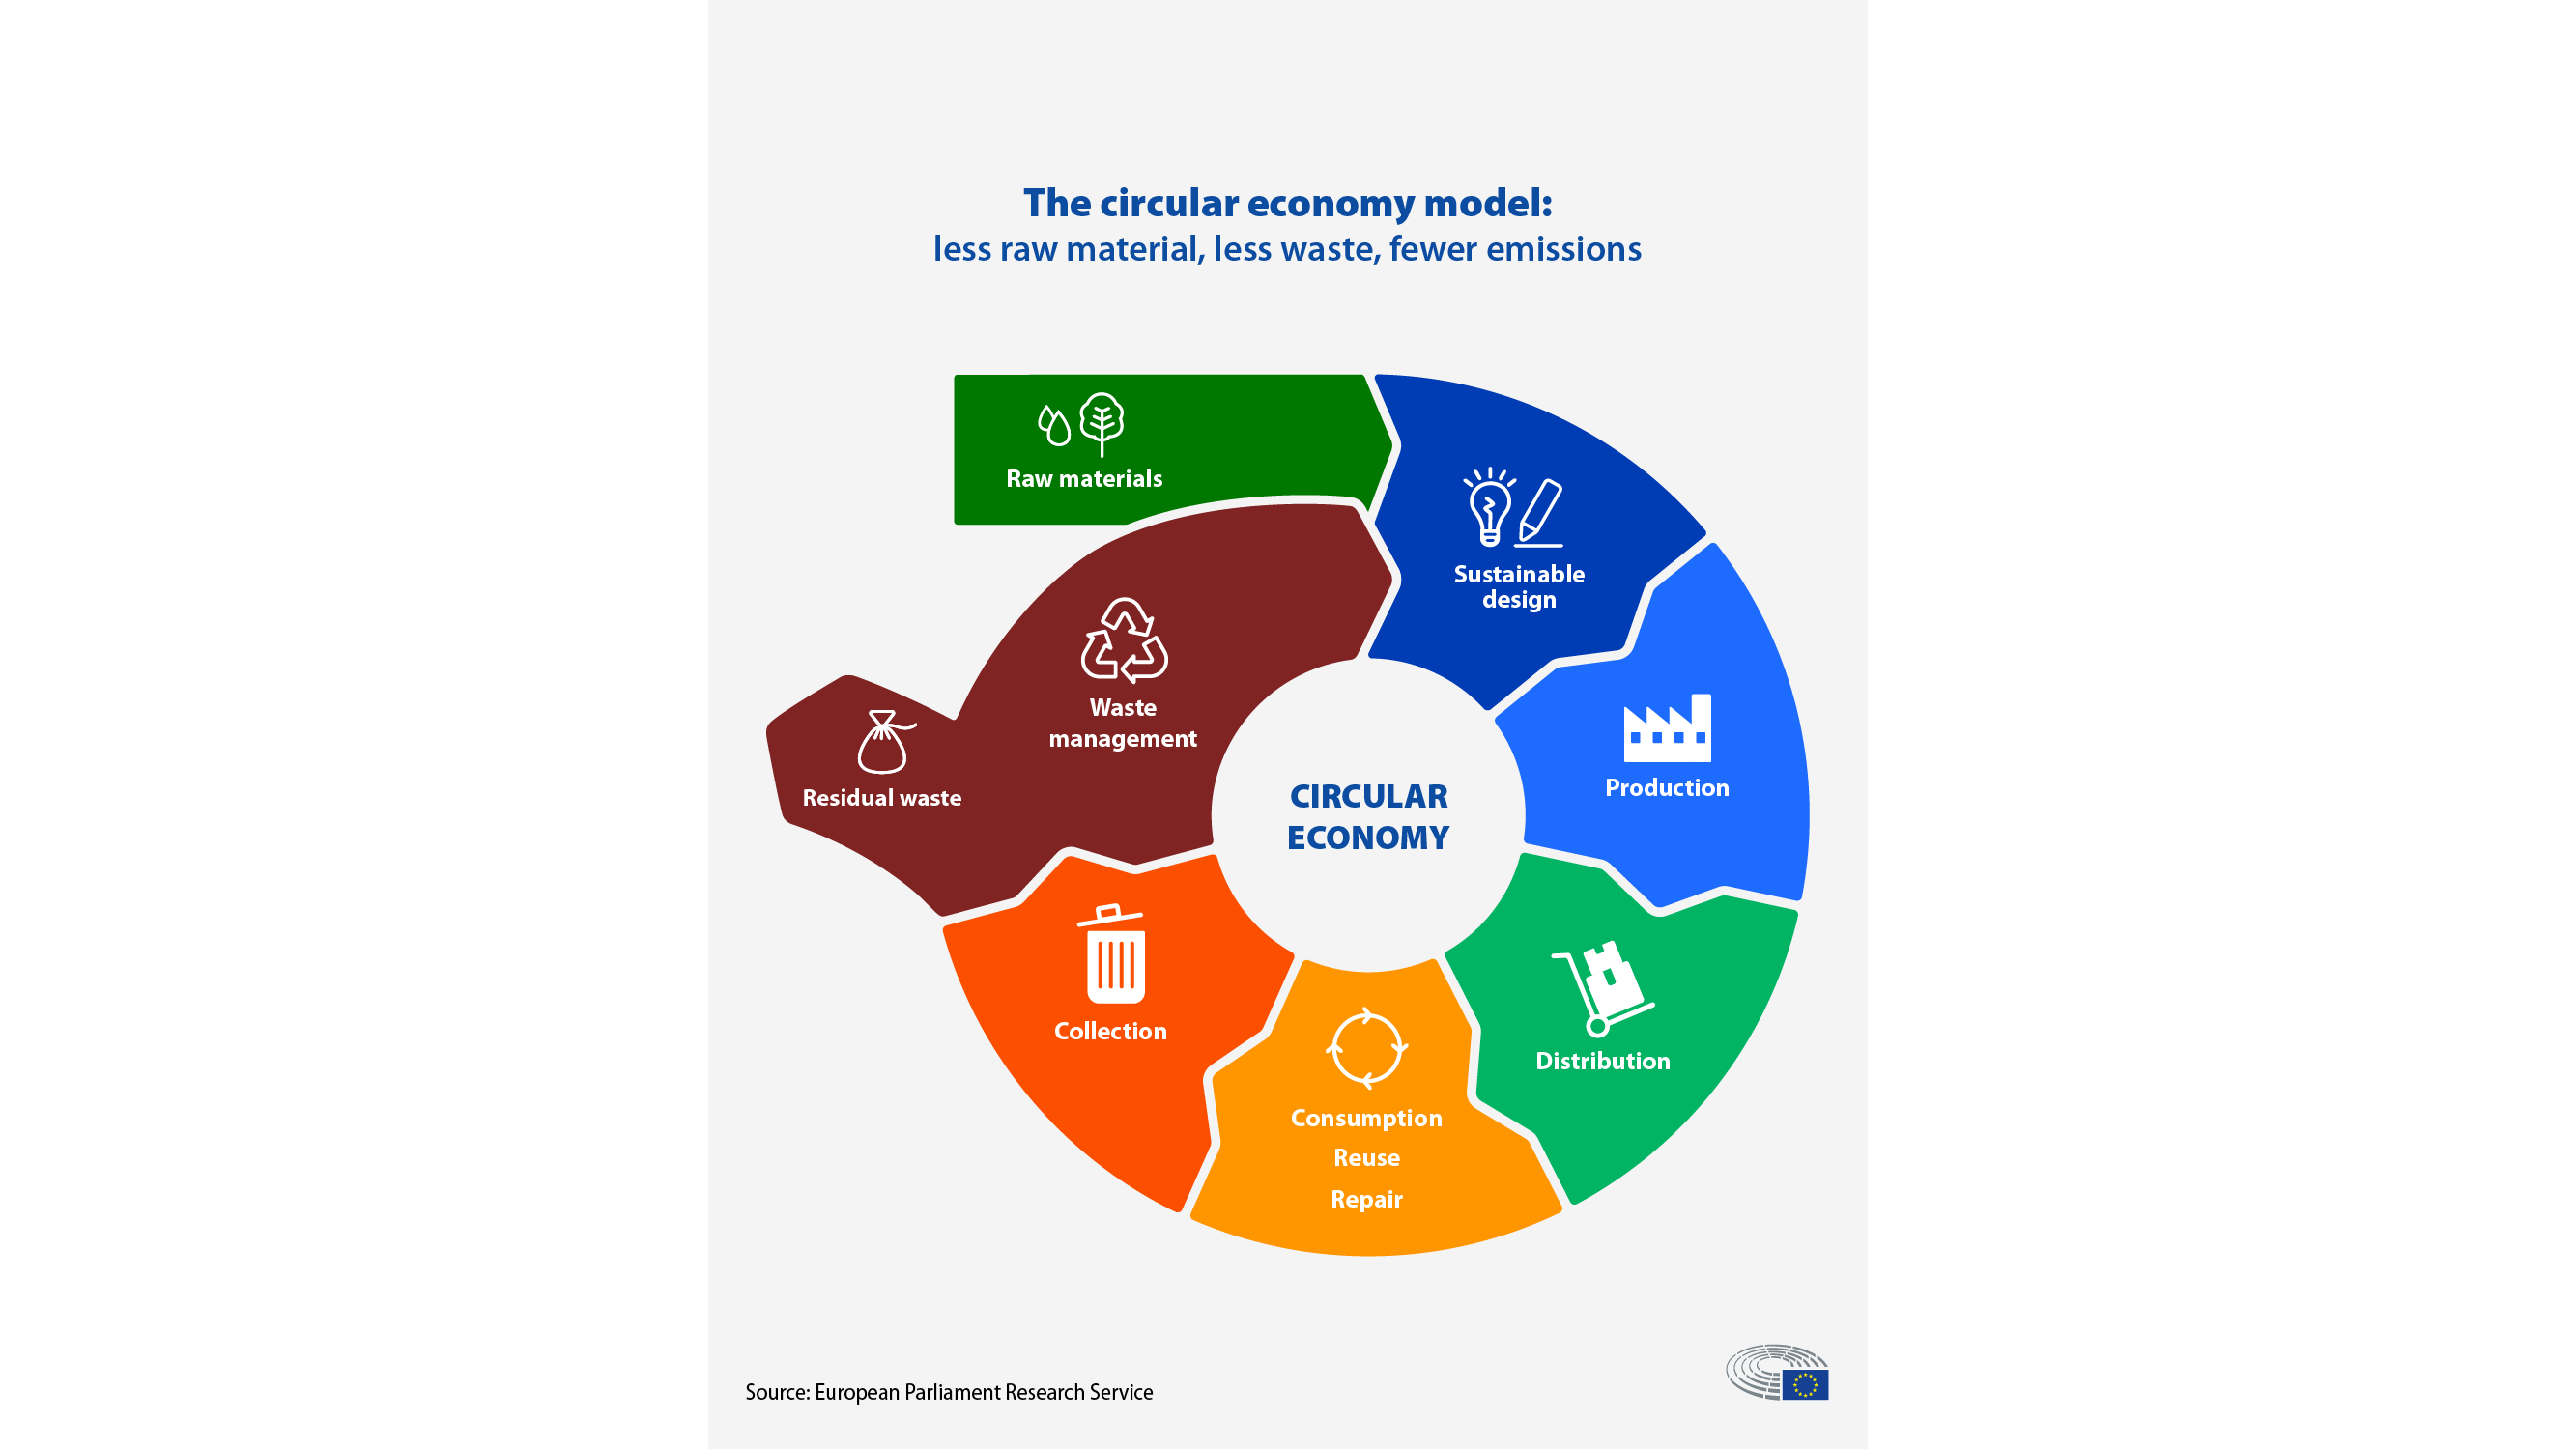 The circular economy model presented by the European Parliament